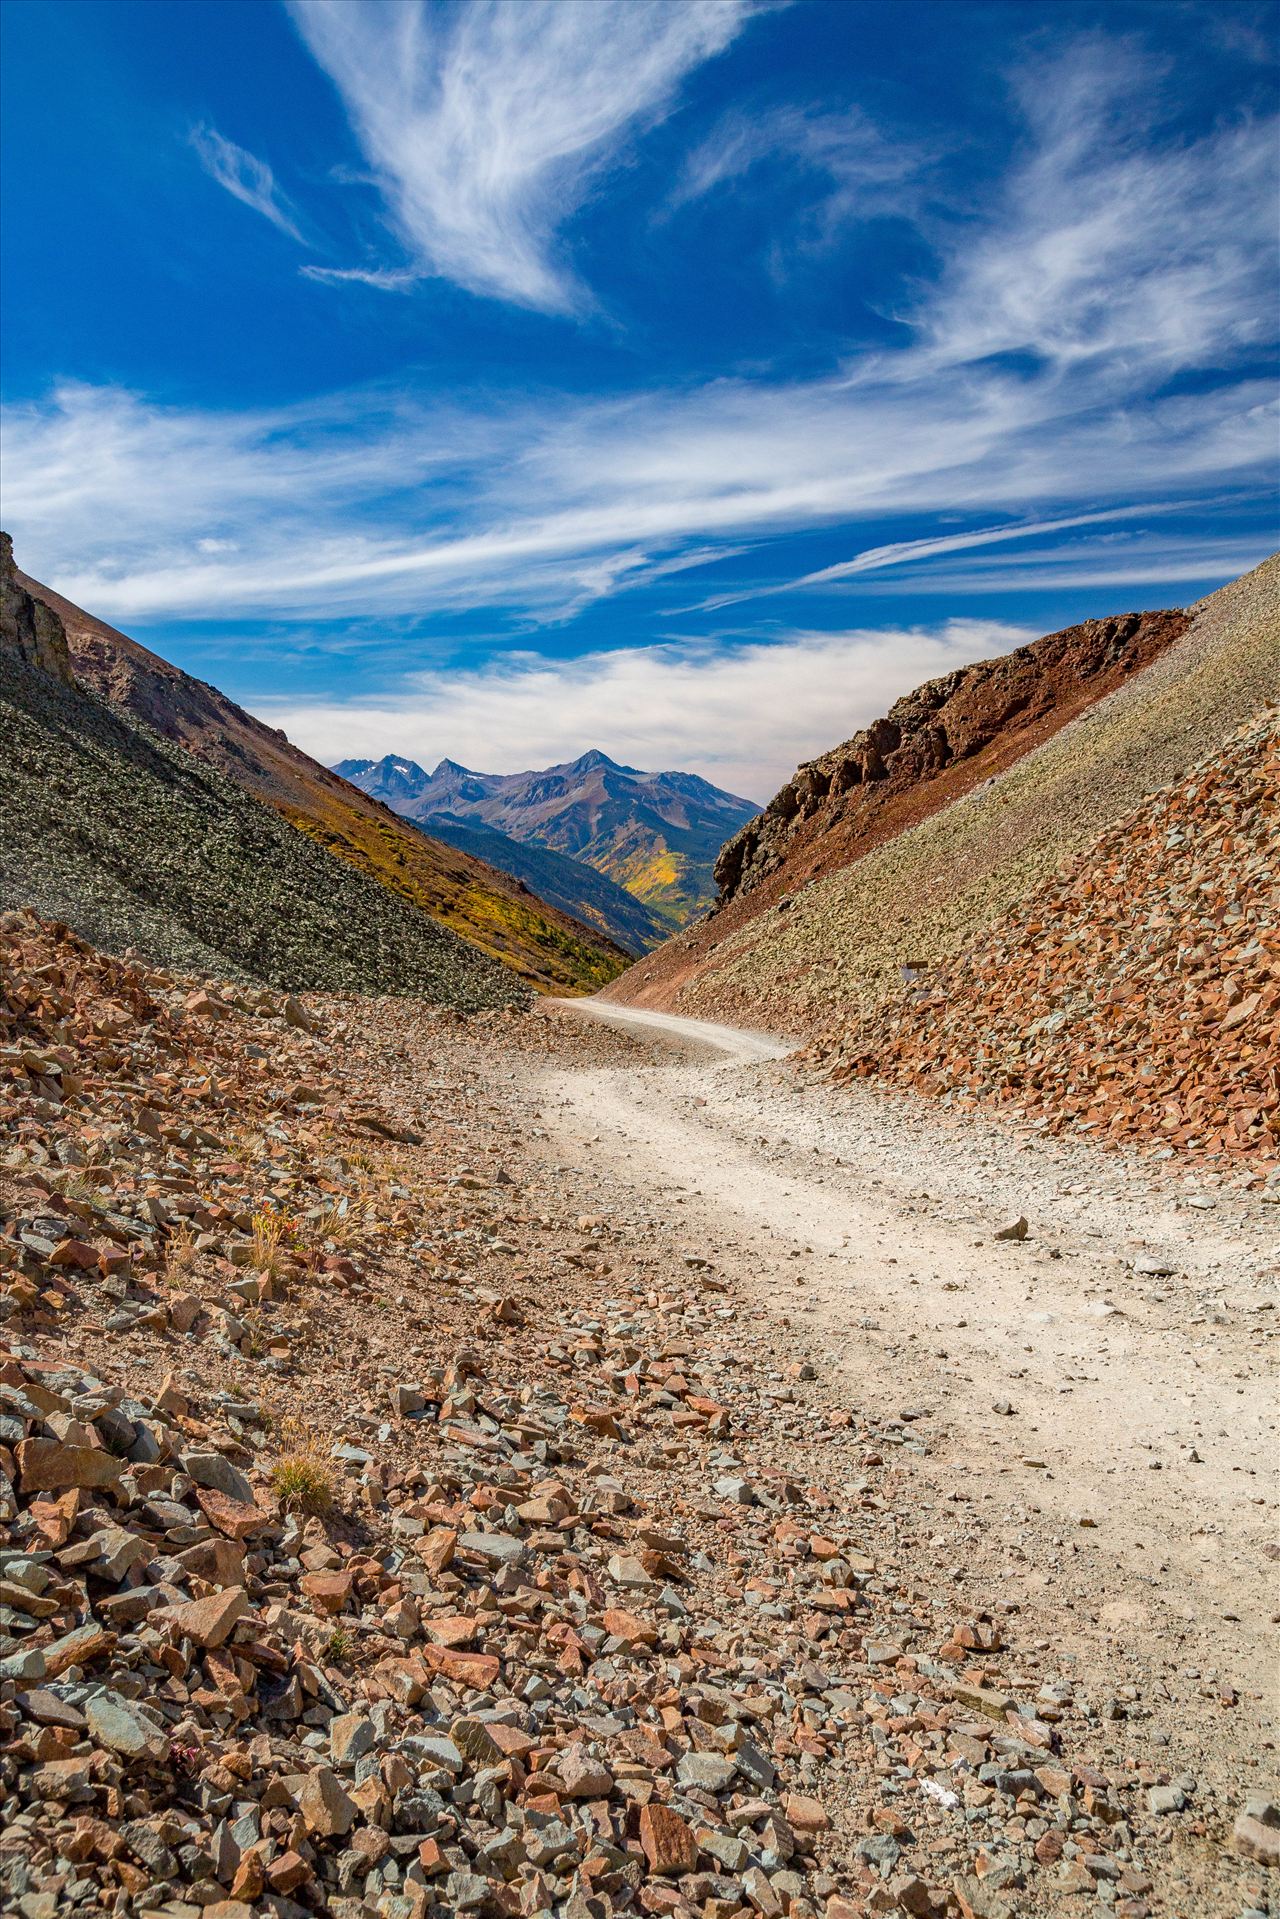 Ophir Pass Summit - The summit of Ophir Pass, between Ouray and Silverton Colorado in the fall. by Scott Smith Photos